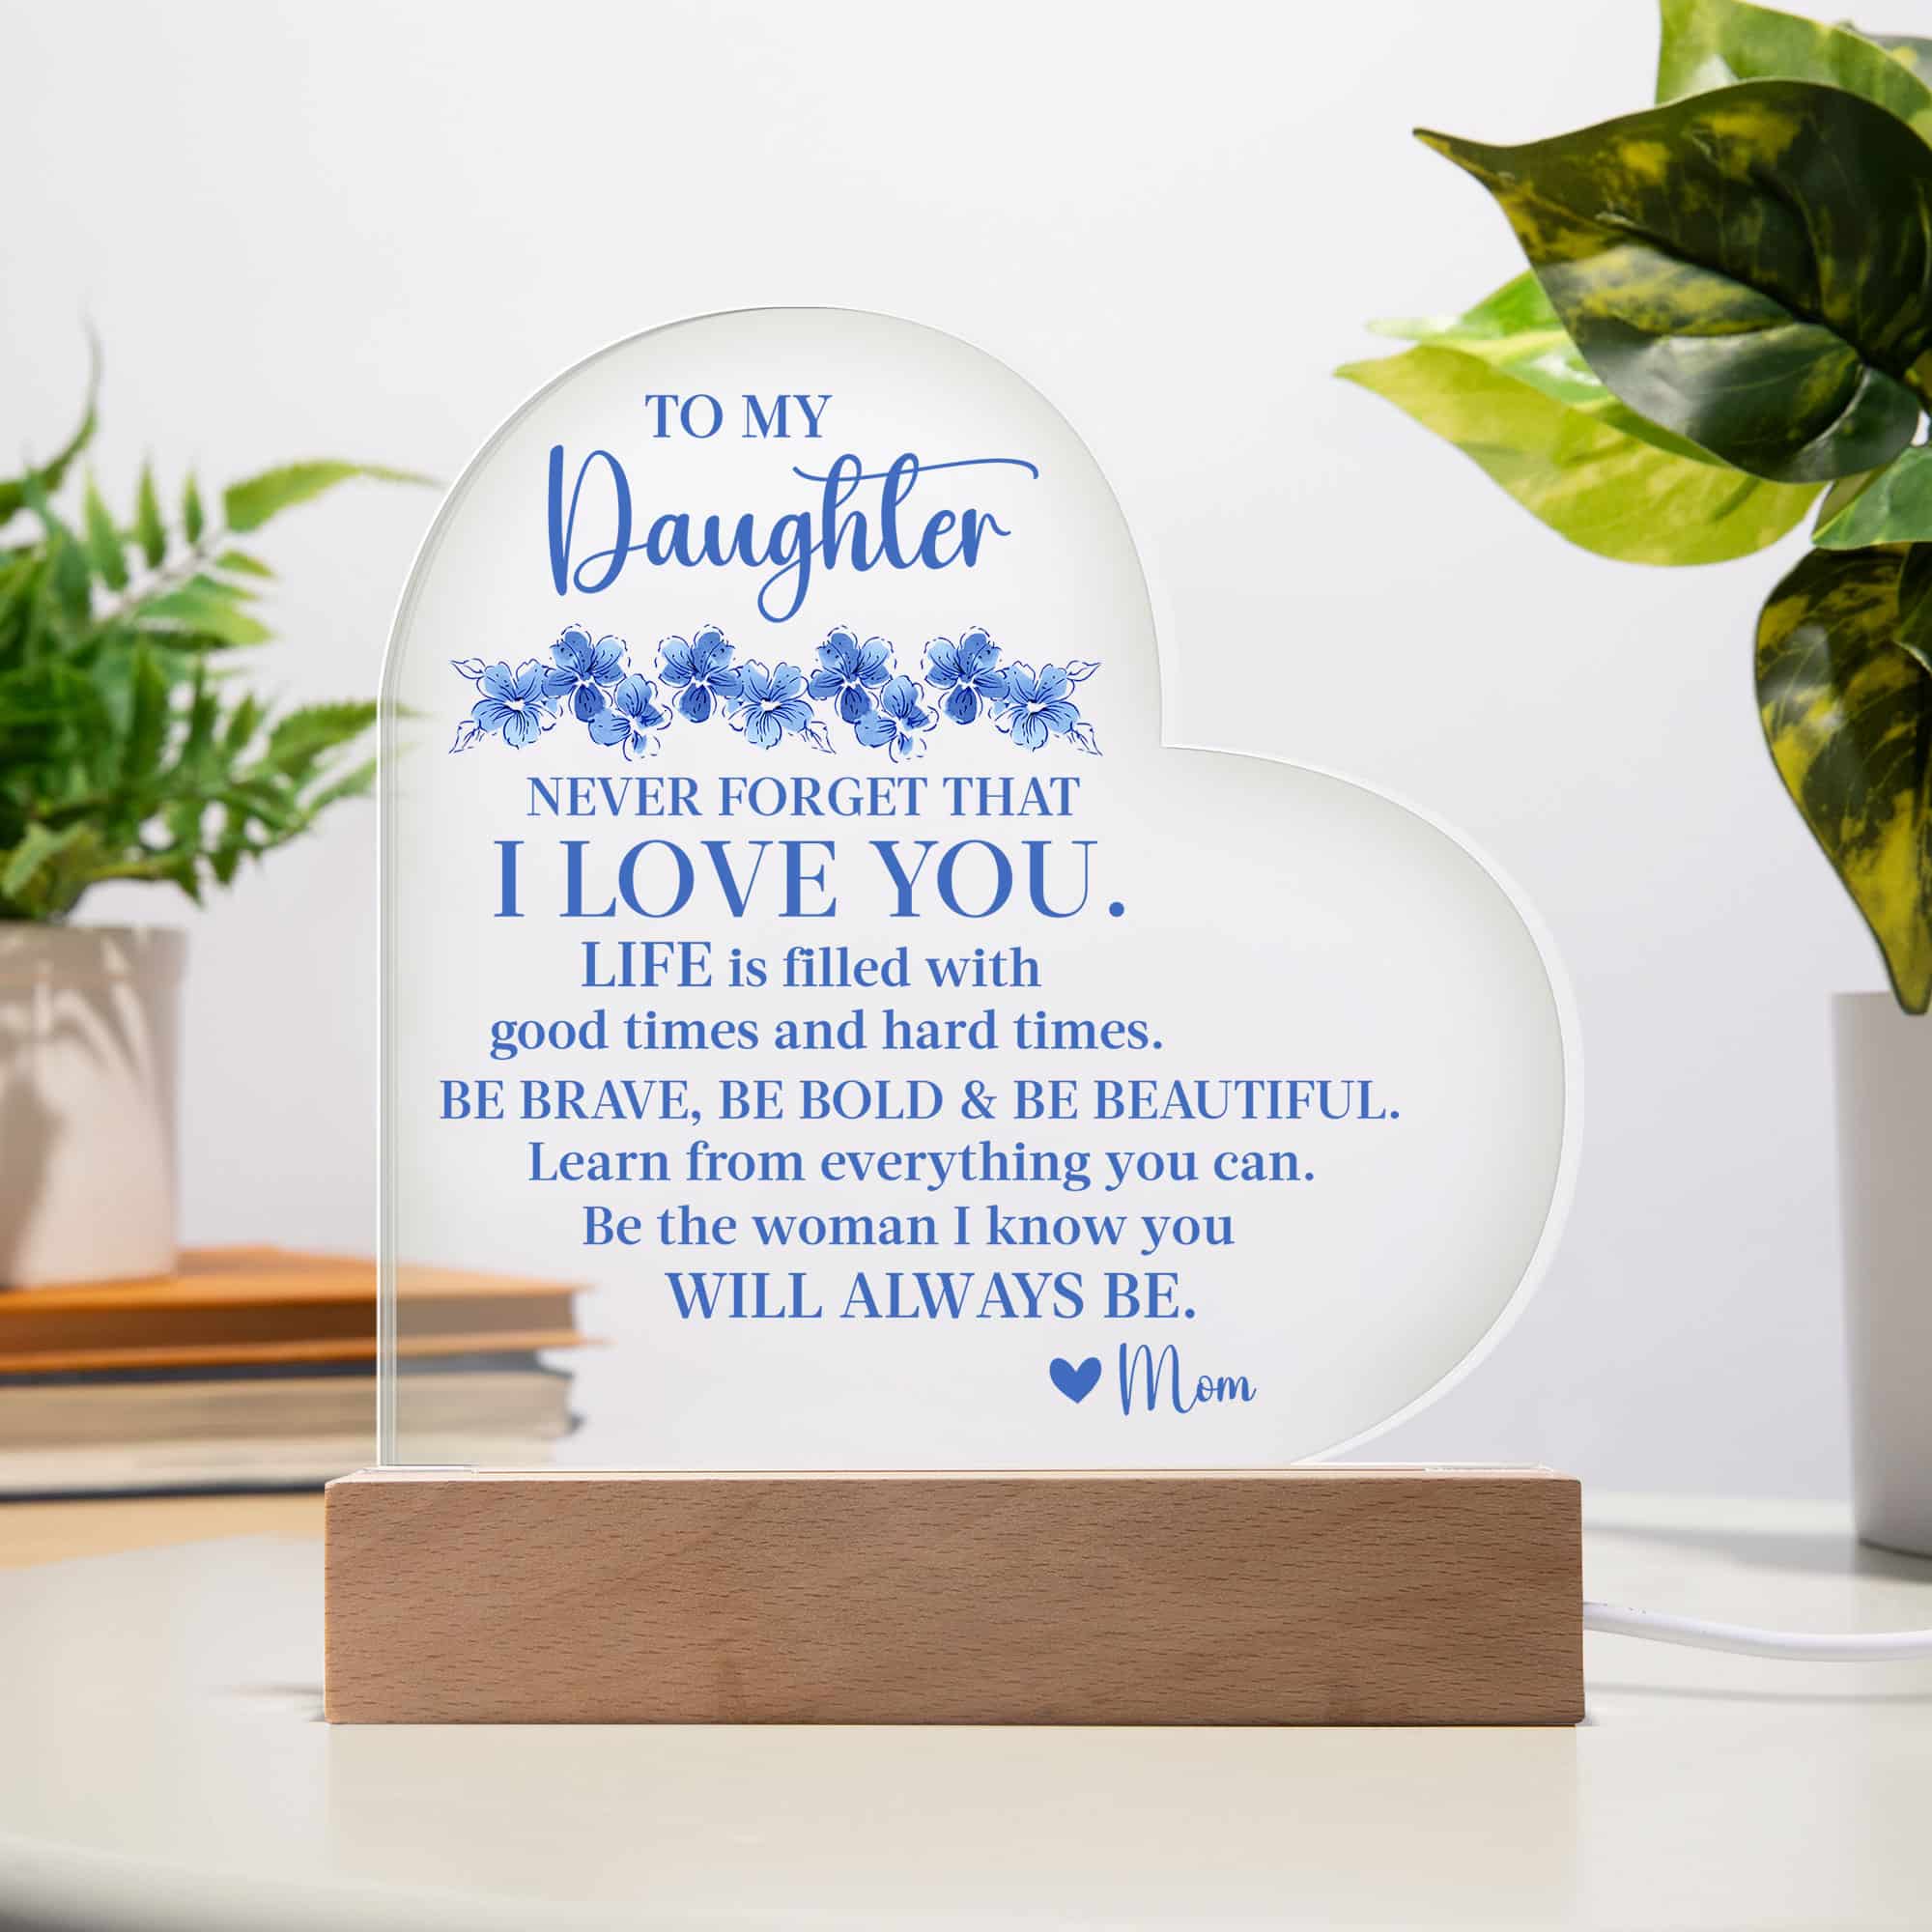 Acrylic Heart Plaque Gift Beautiful Reminder Of Love And Support For Daughter | Custom Name - FavoJewelry